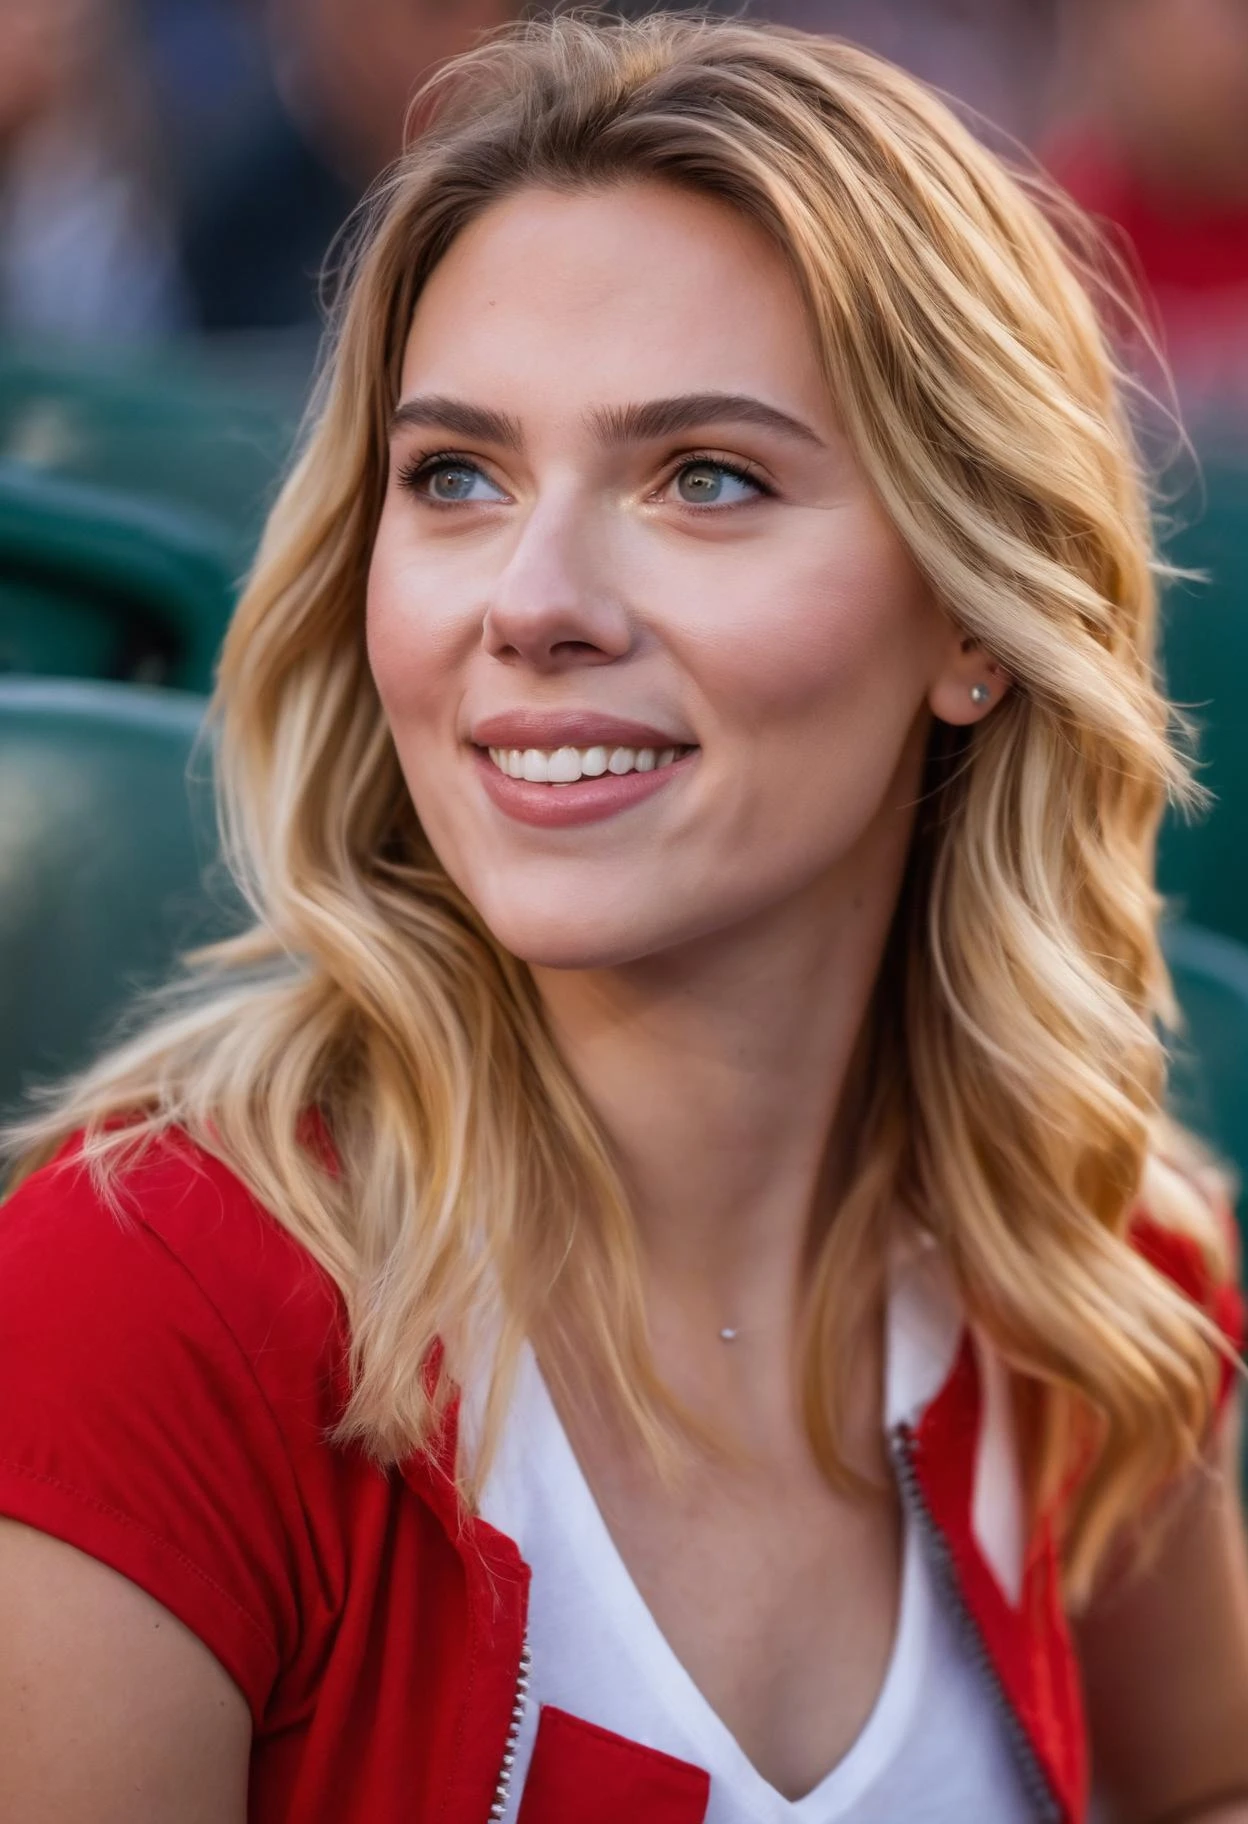 professional close-up portrait photography of the face of a beautiful  ((ohwx woman)) at baseball stadium during Twilight, Nikon Z9